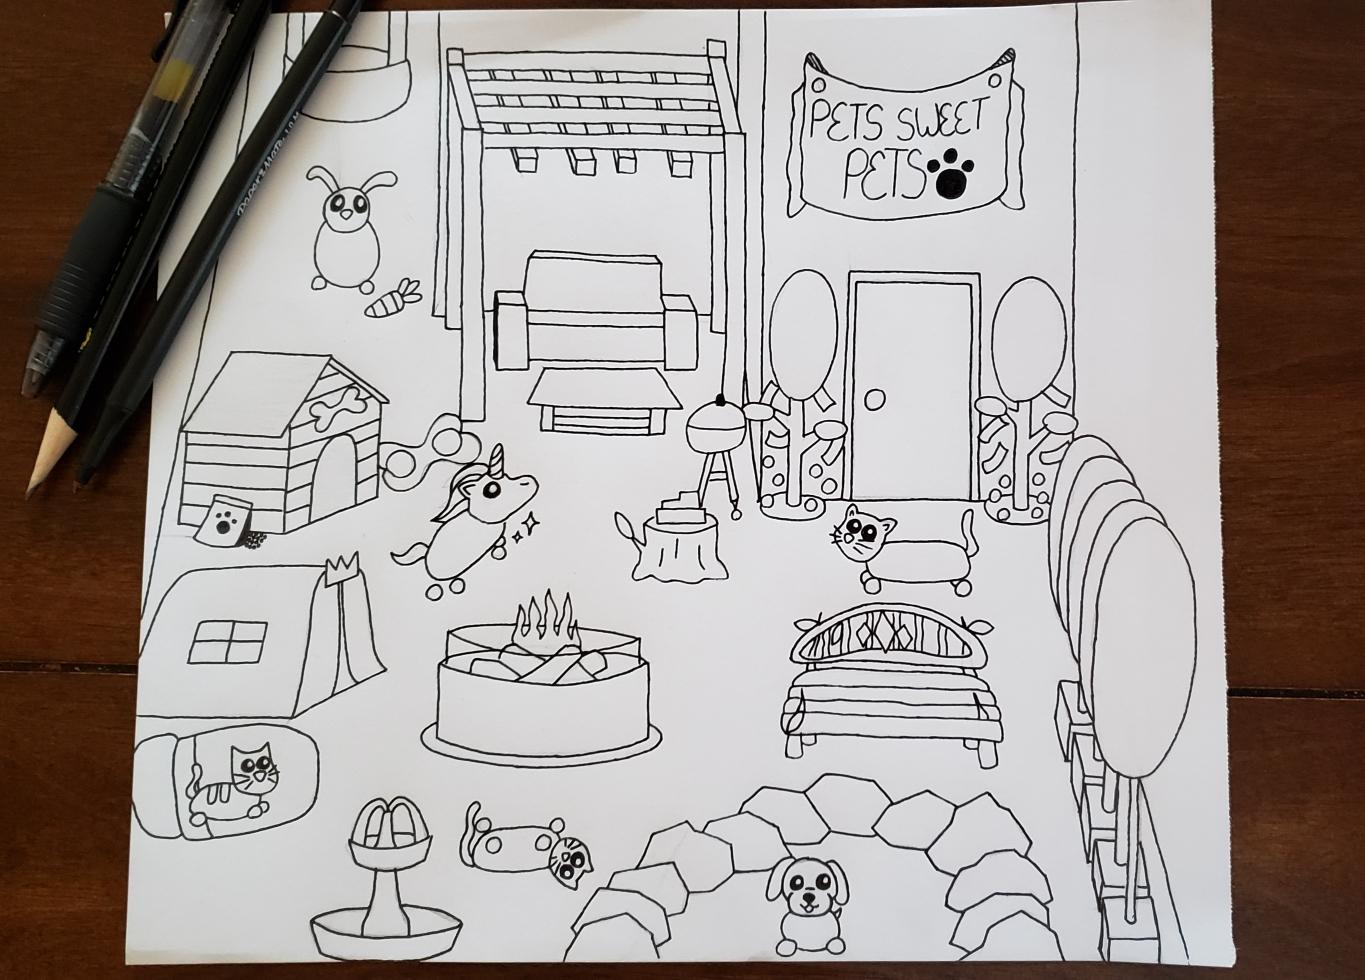 Angelo On Twitter Newfissy Hey This Is My Adopt Me Art Hope U Guys Like It I Drew My House With All My Pets P S I Dedicated This House To My